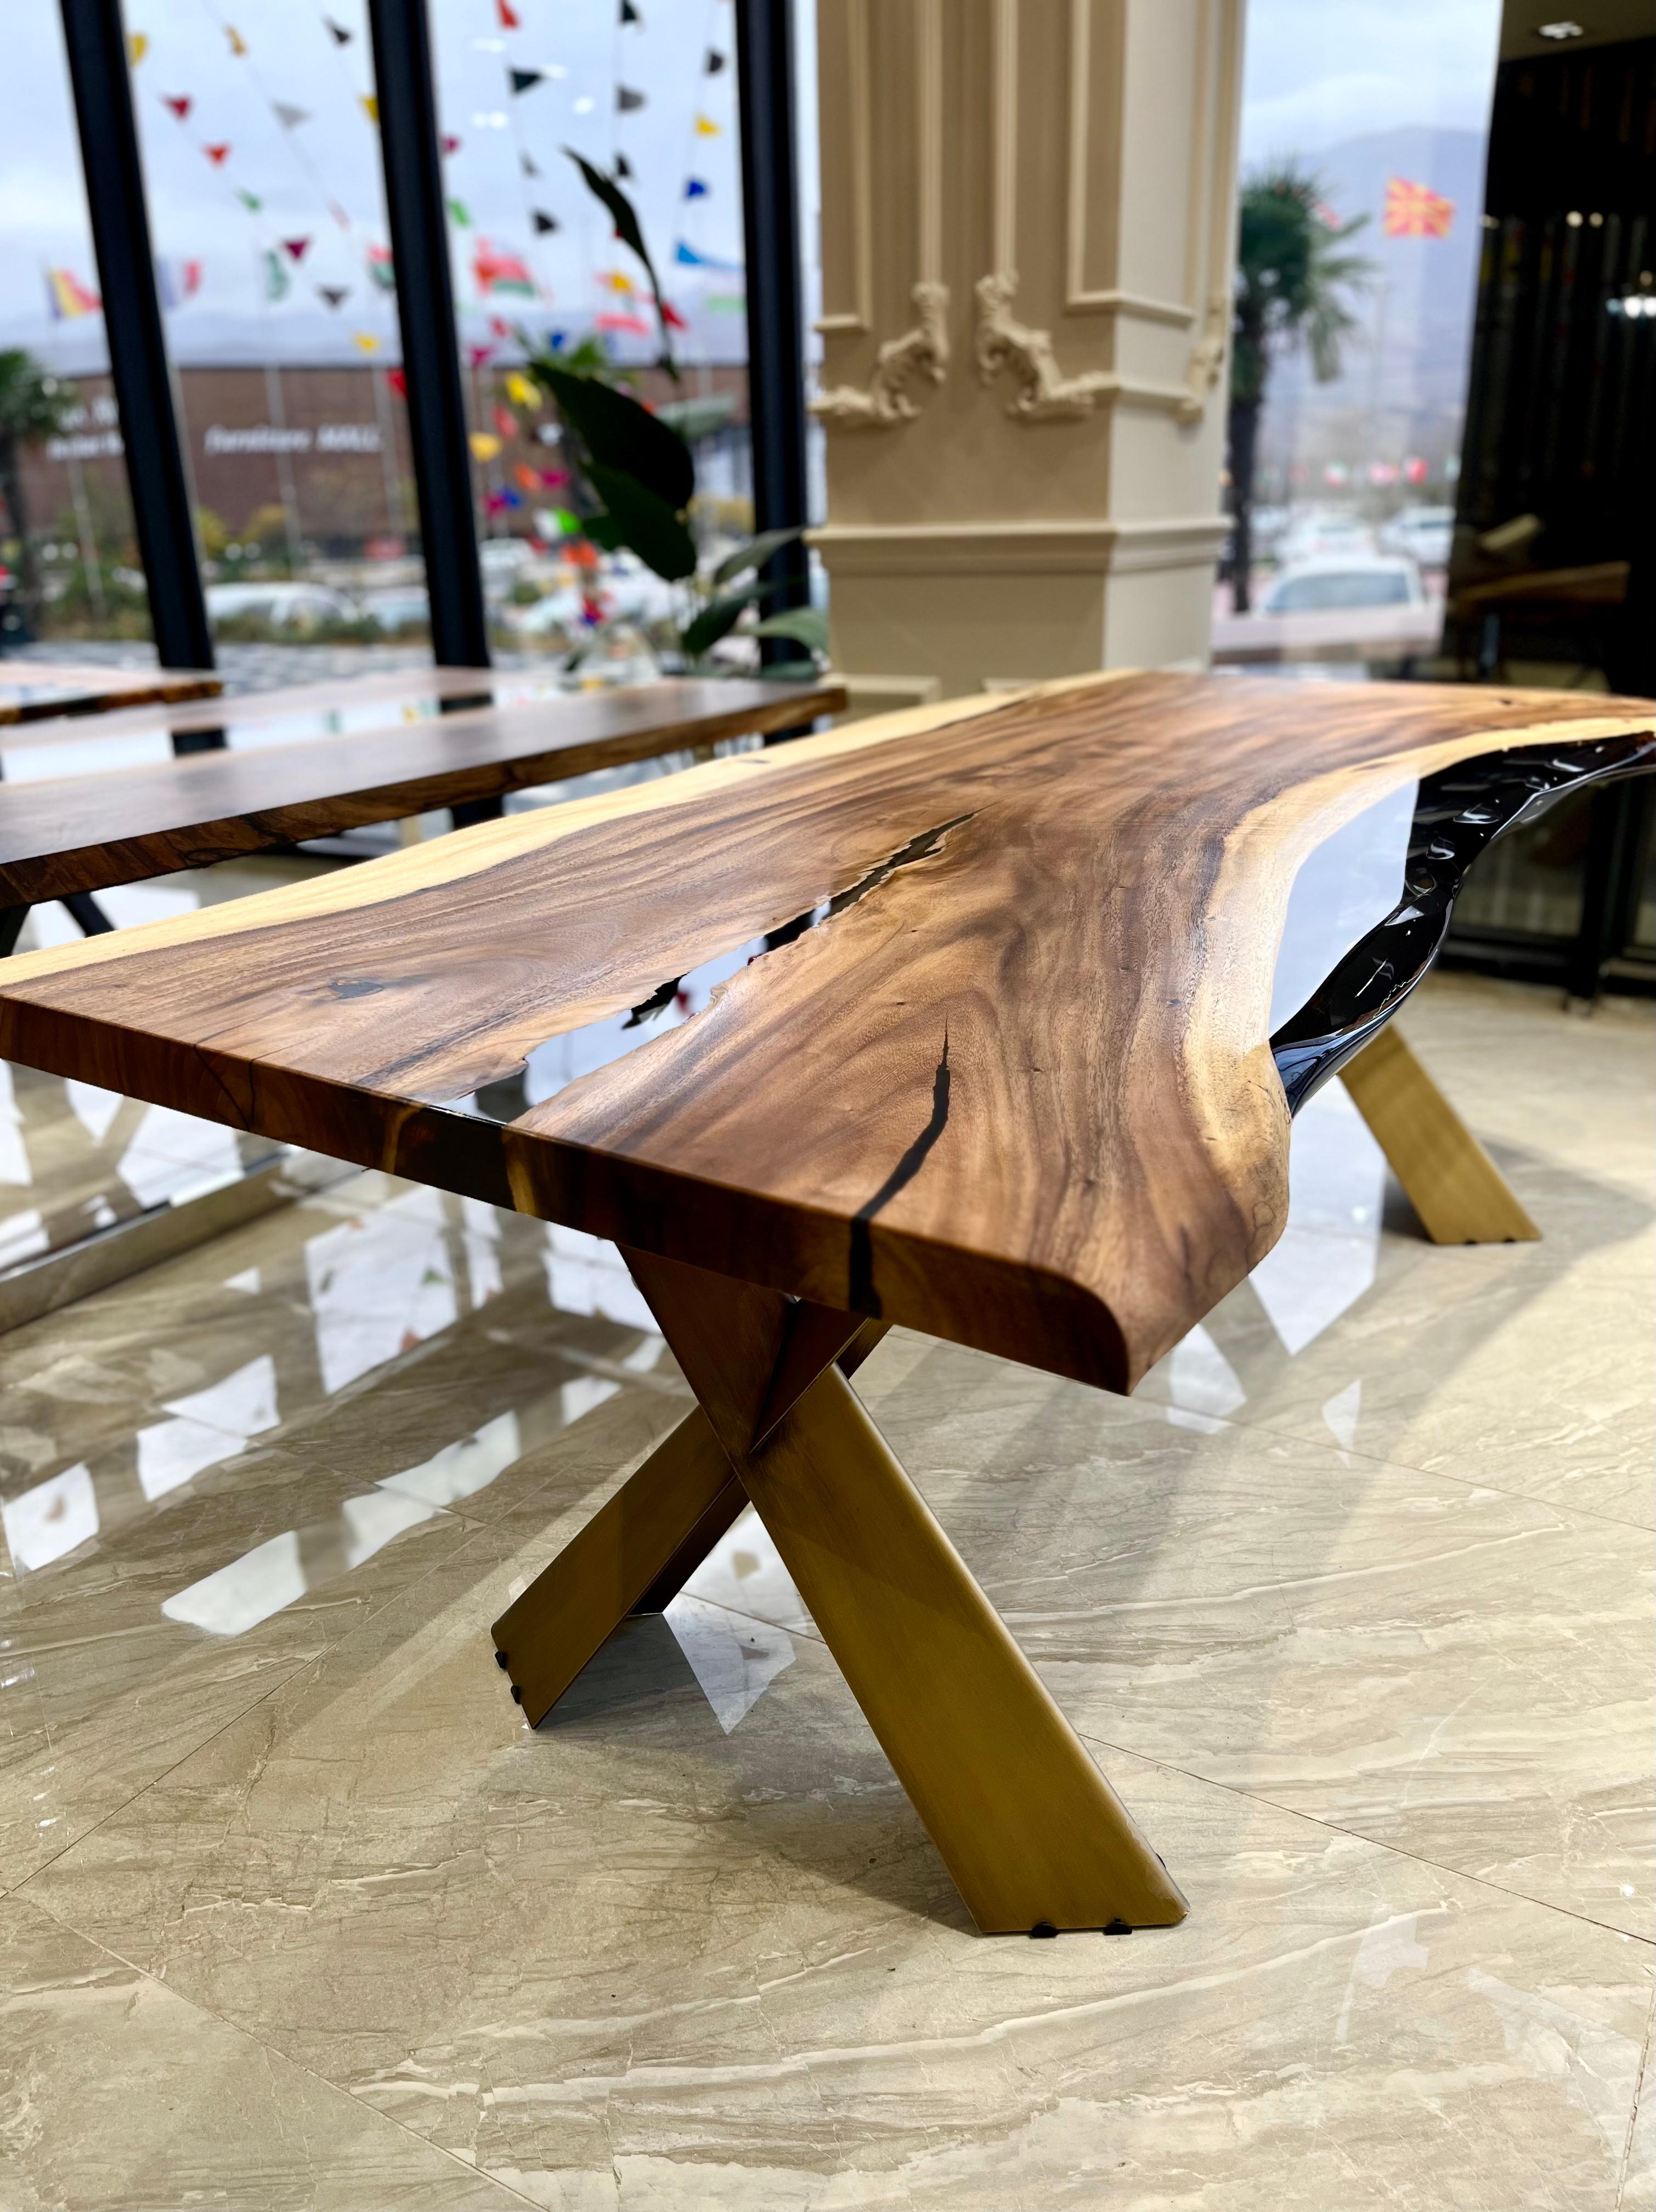 Tropical Suar Wood Epoxy Resin Table

This table is made of tropical Suar Wood. The suar wood is combined with clear epoxy! 
Epoxy is curved to get the 